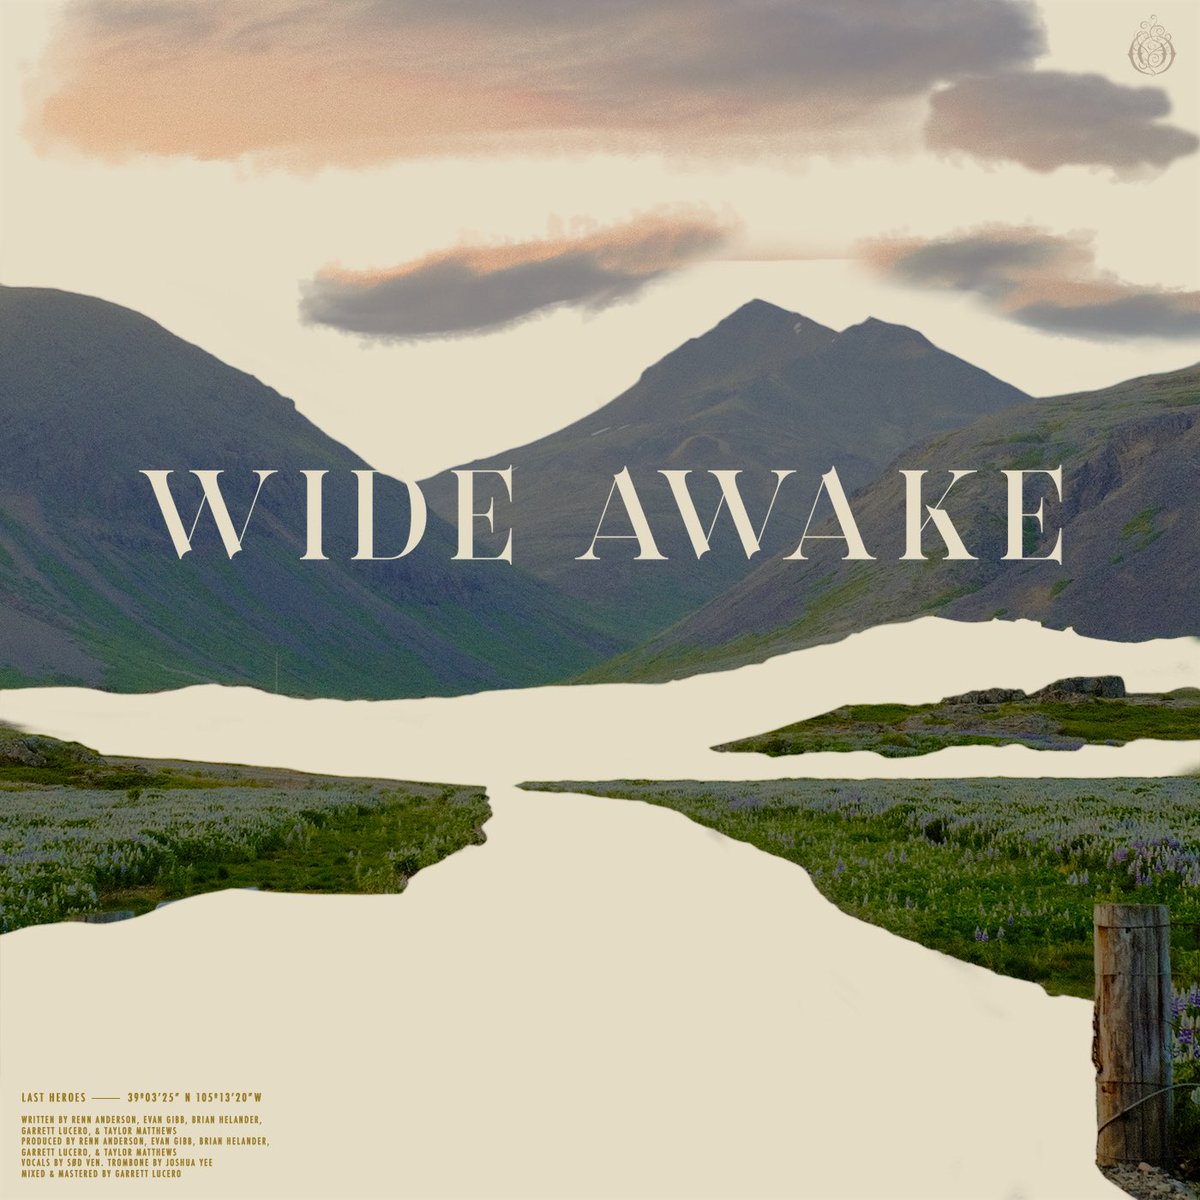 WIDE AWAKE ⛰️ Thursday 4/25 So unbelievably hyped to be releasing again & also put out some new music with our boys sød ven 🫶